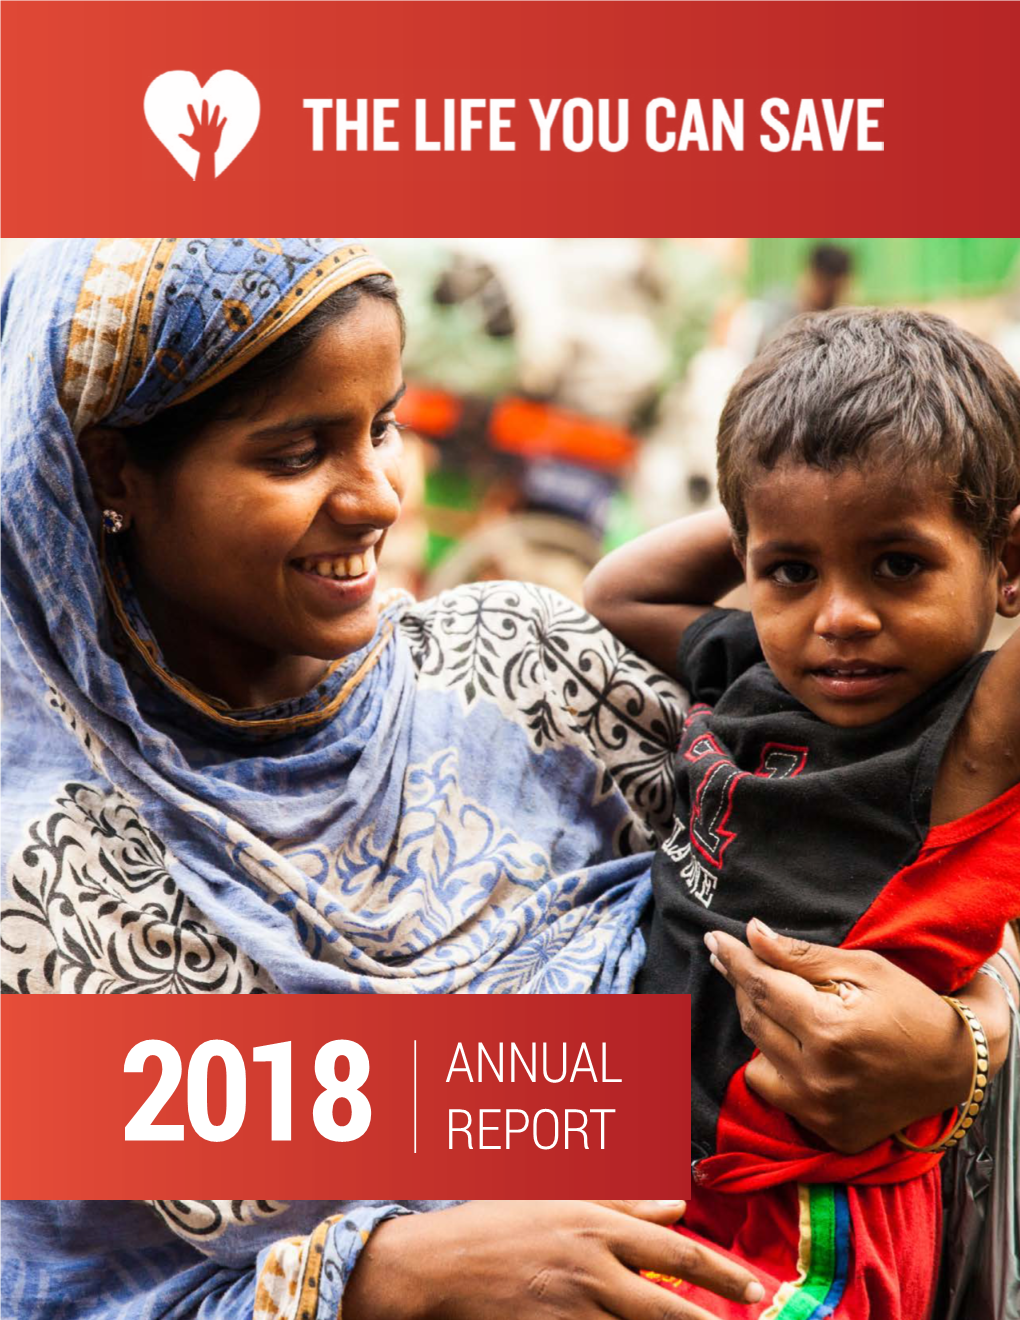 2018 Annual Report a Message from the Executive Director